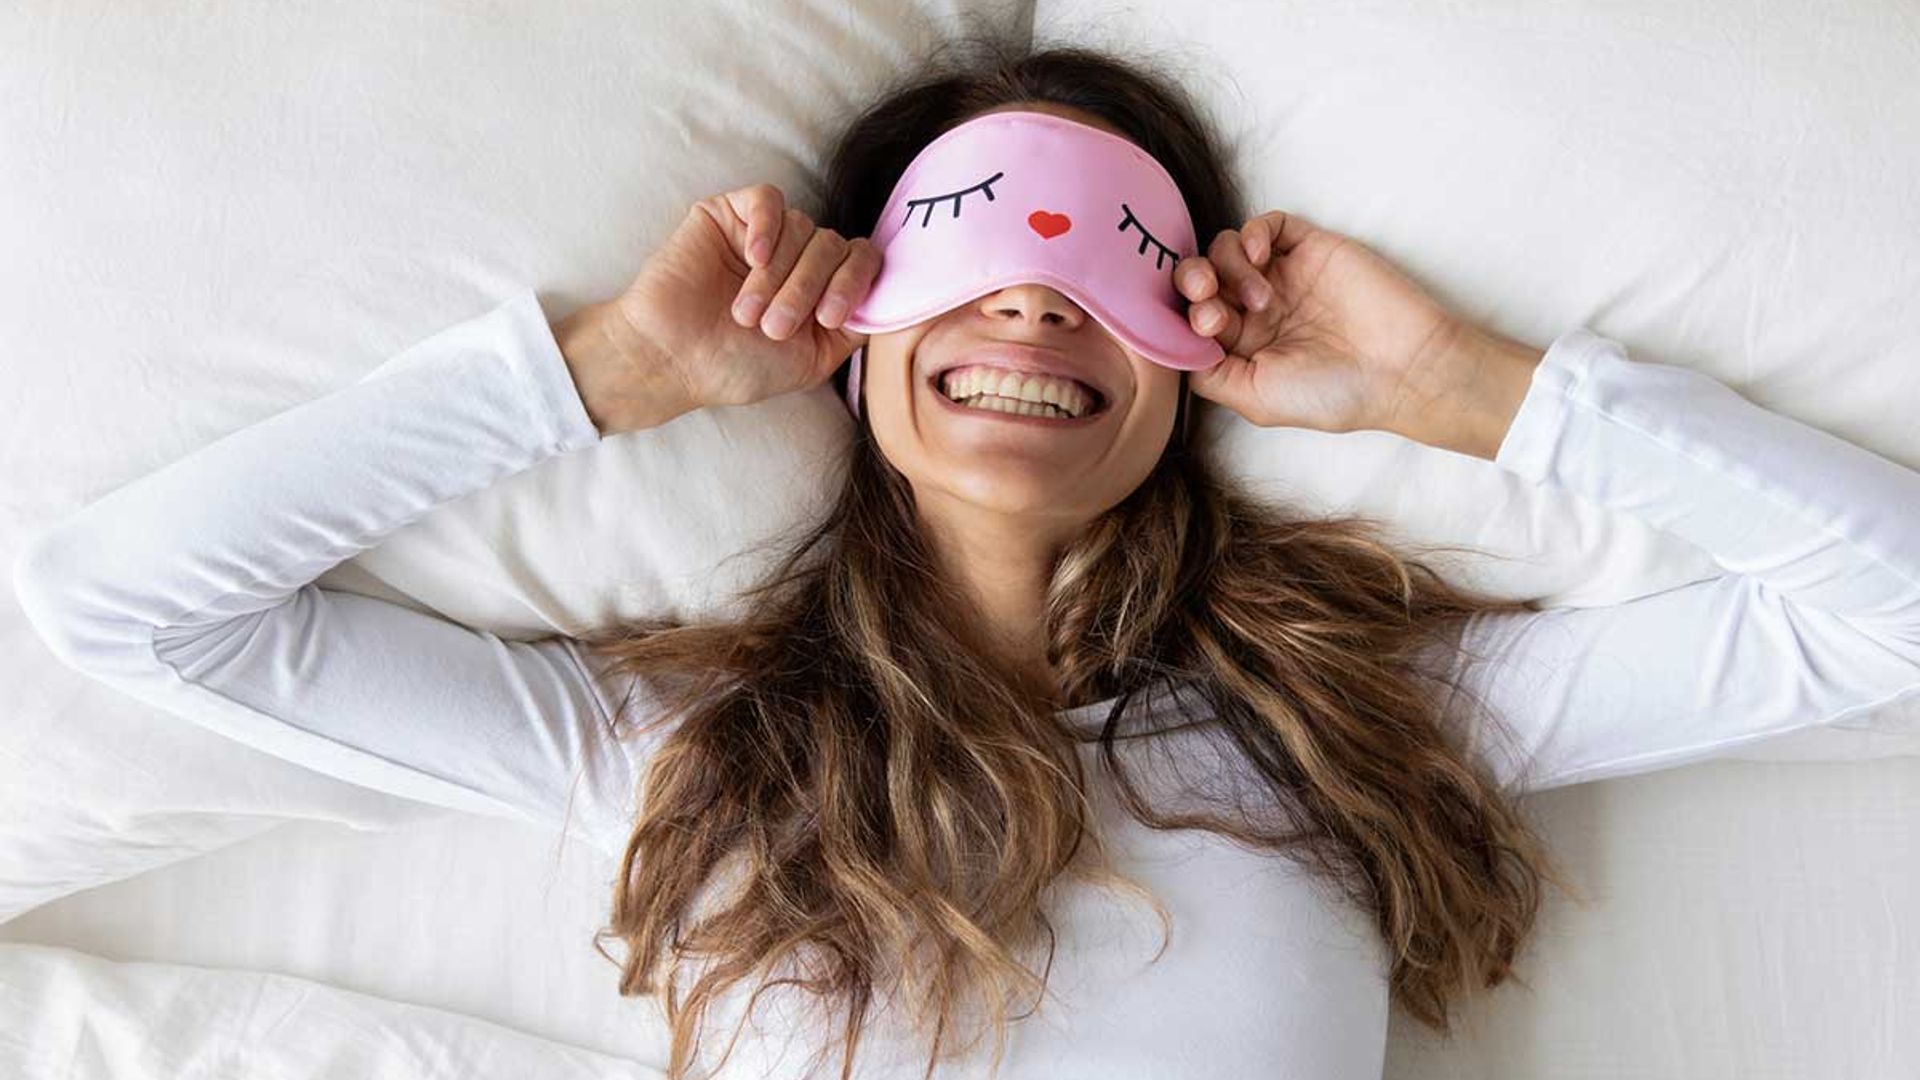 This new sleep tools helps you find the perfect mattress – and it’s genius!